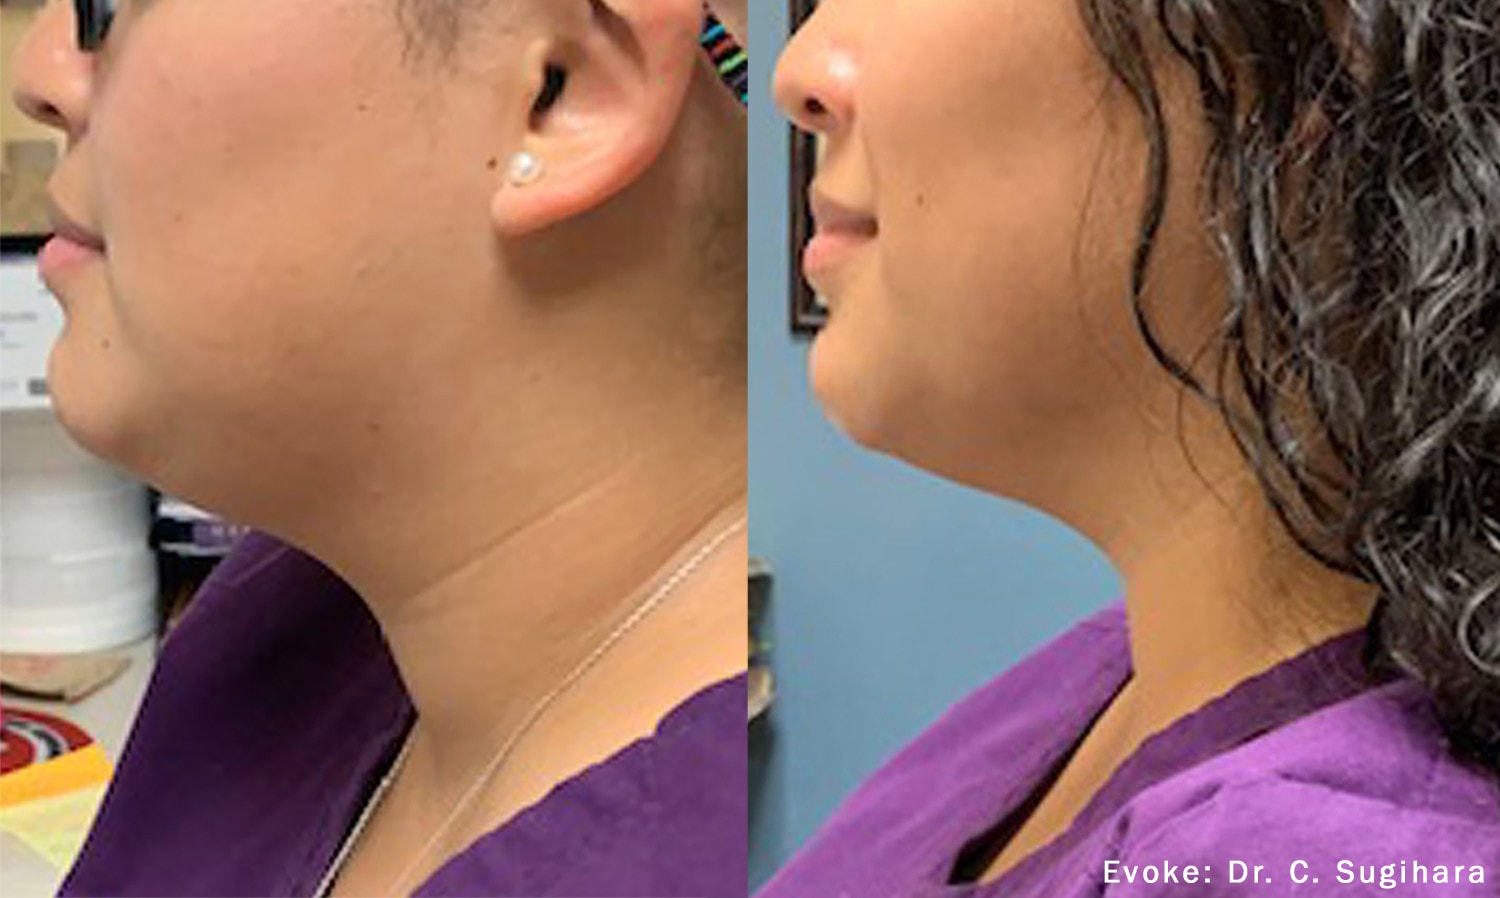 Before and After photos of Dr. Sugihara’s Evoke treatments reducing fat and contouring a woman’s neck and chin